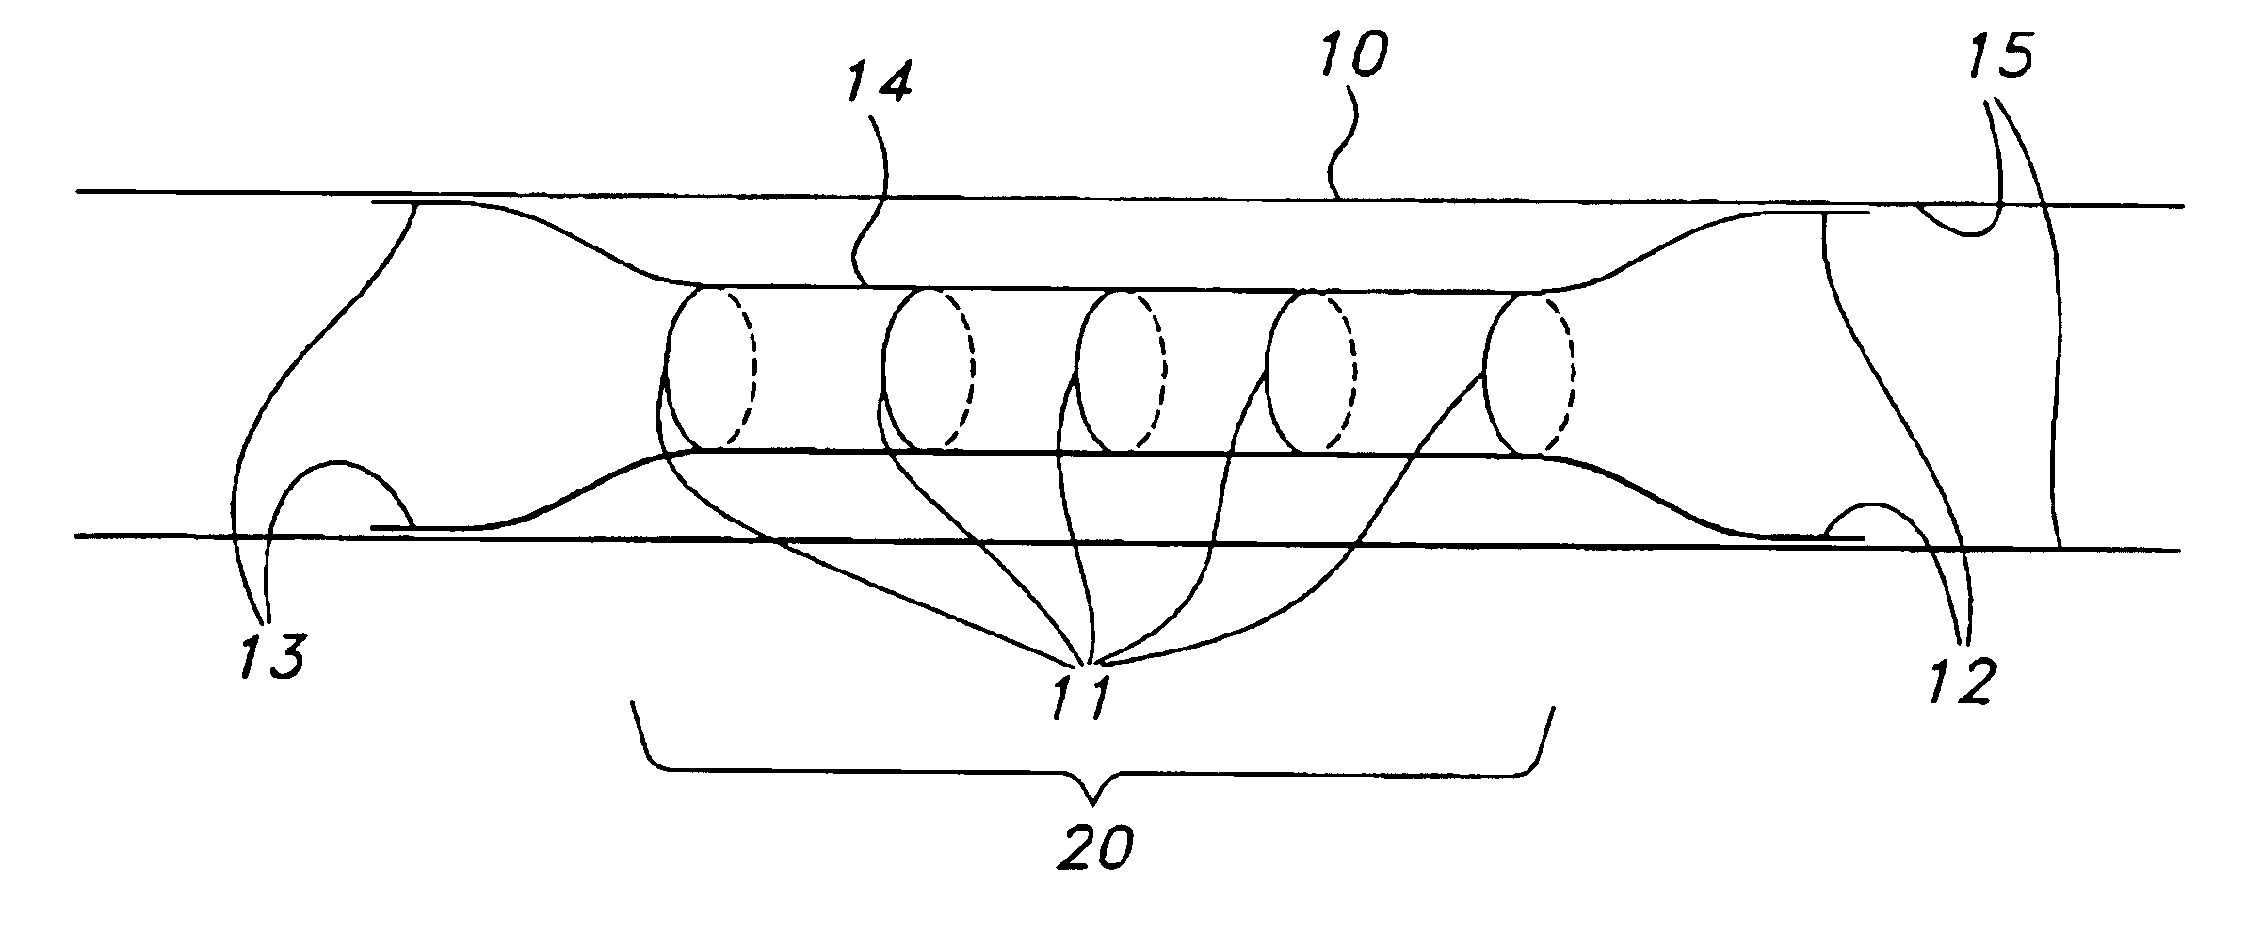 Stent with controlled expansion